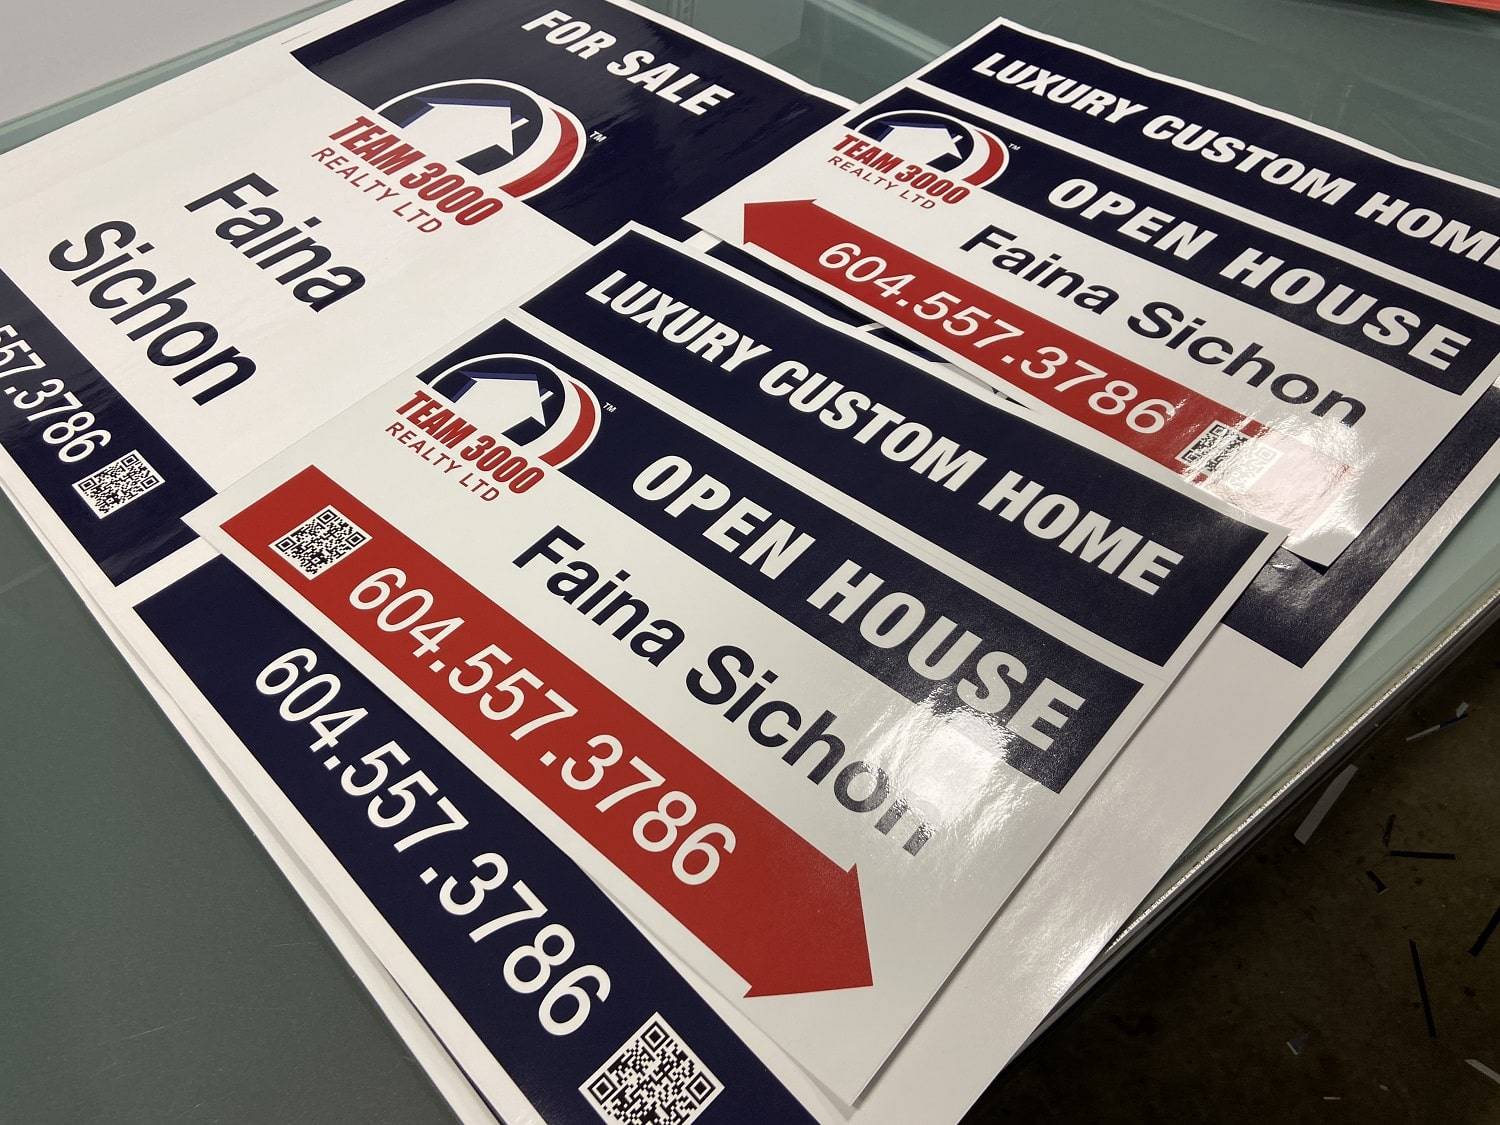 custom open house signs